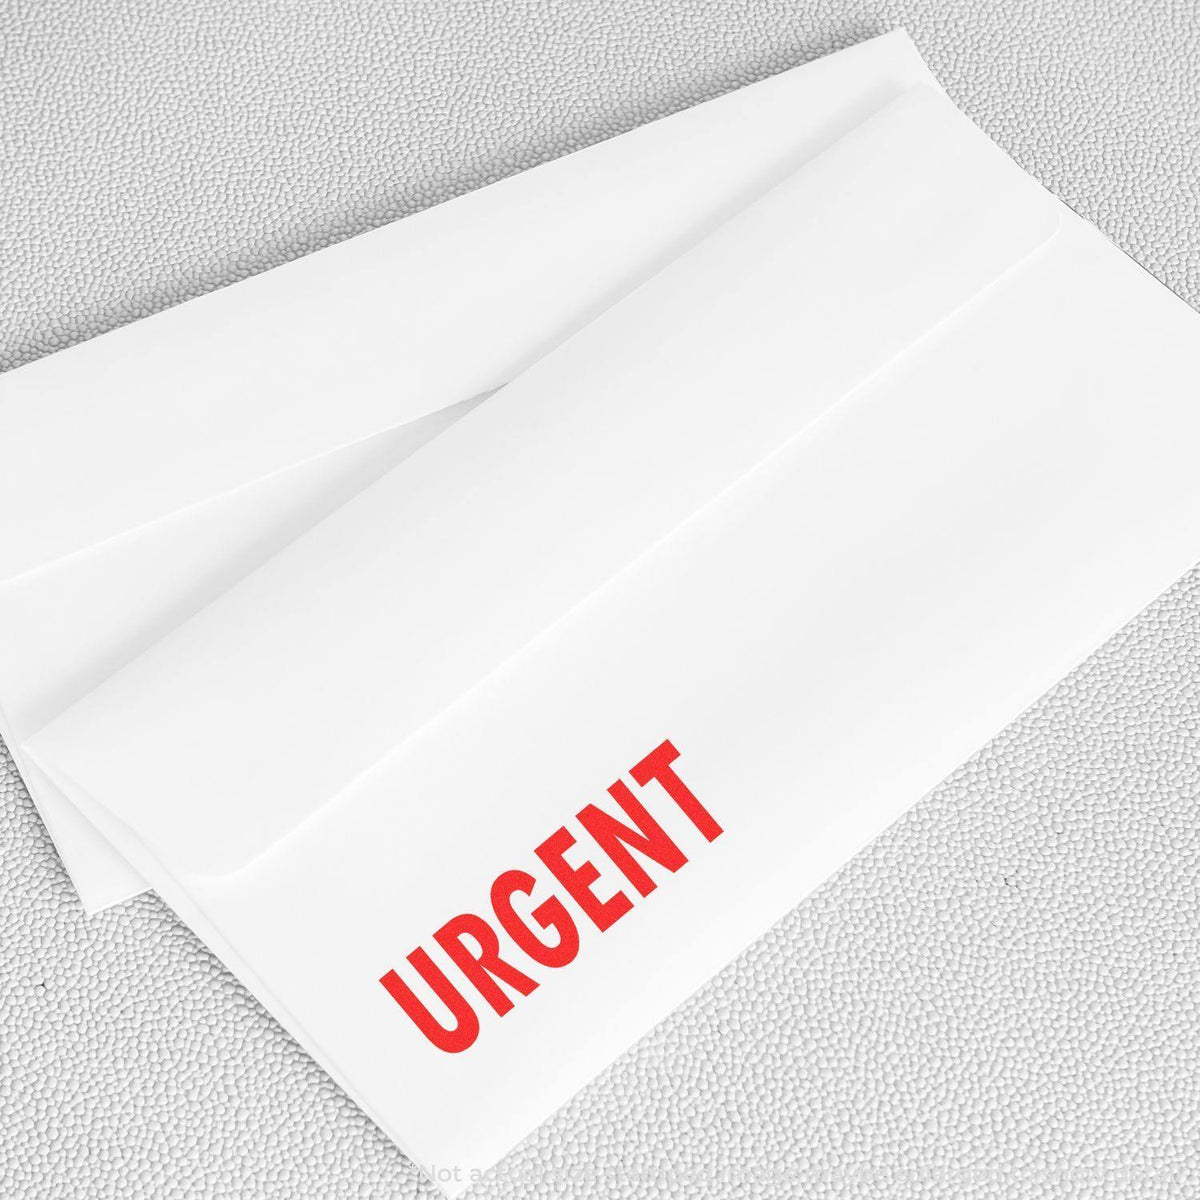 In Use Urgent Rubber Stamp Image